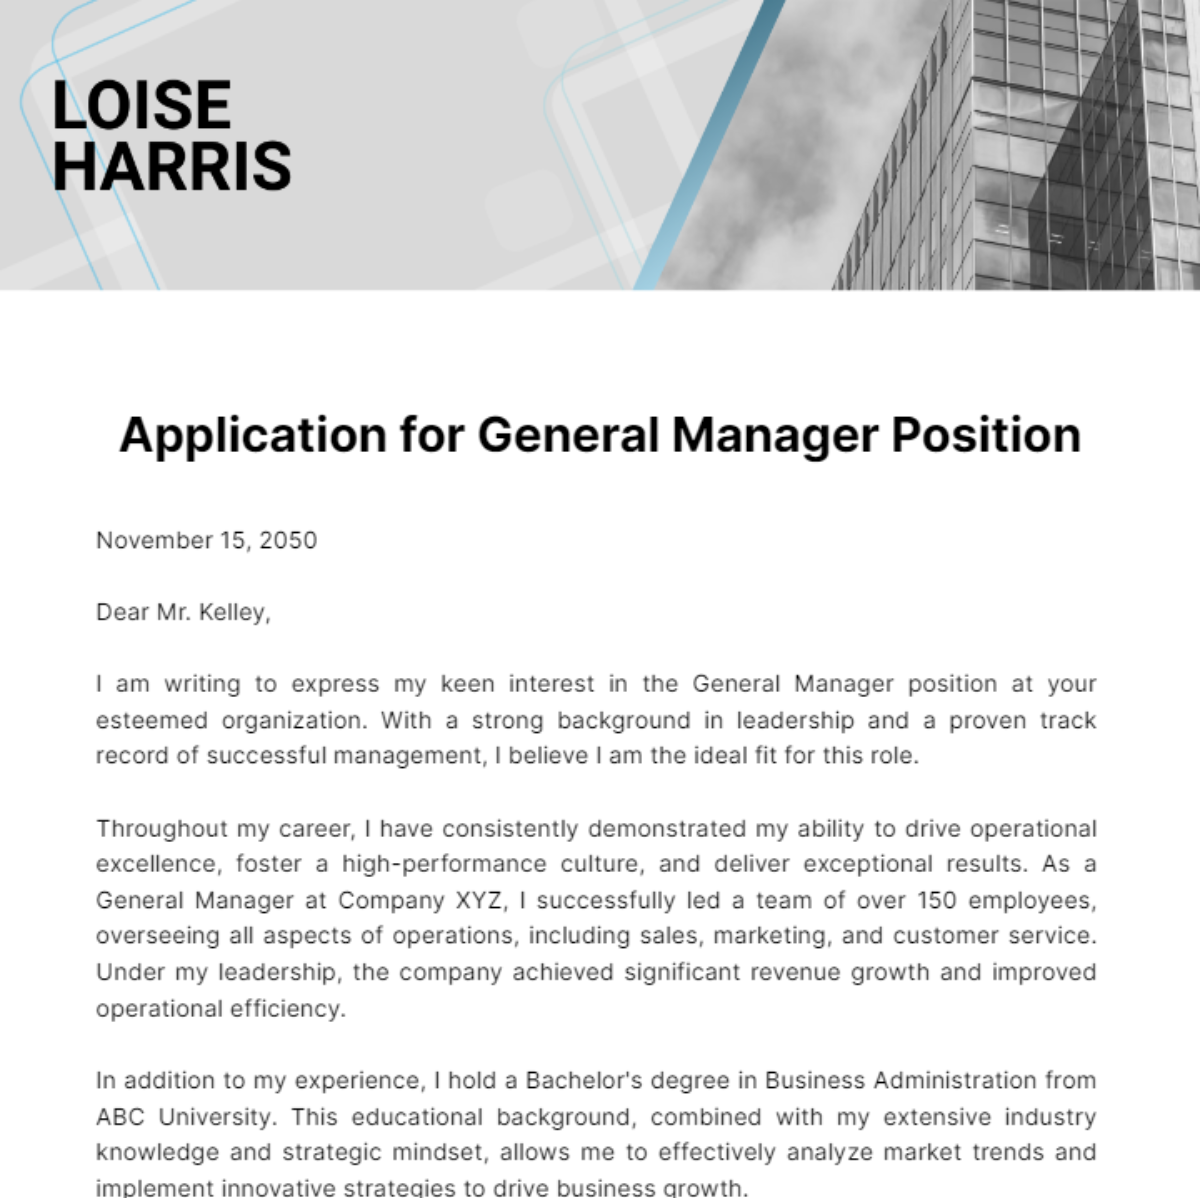 Application Letter for General Manager Position  Template